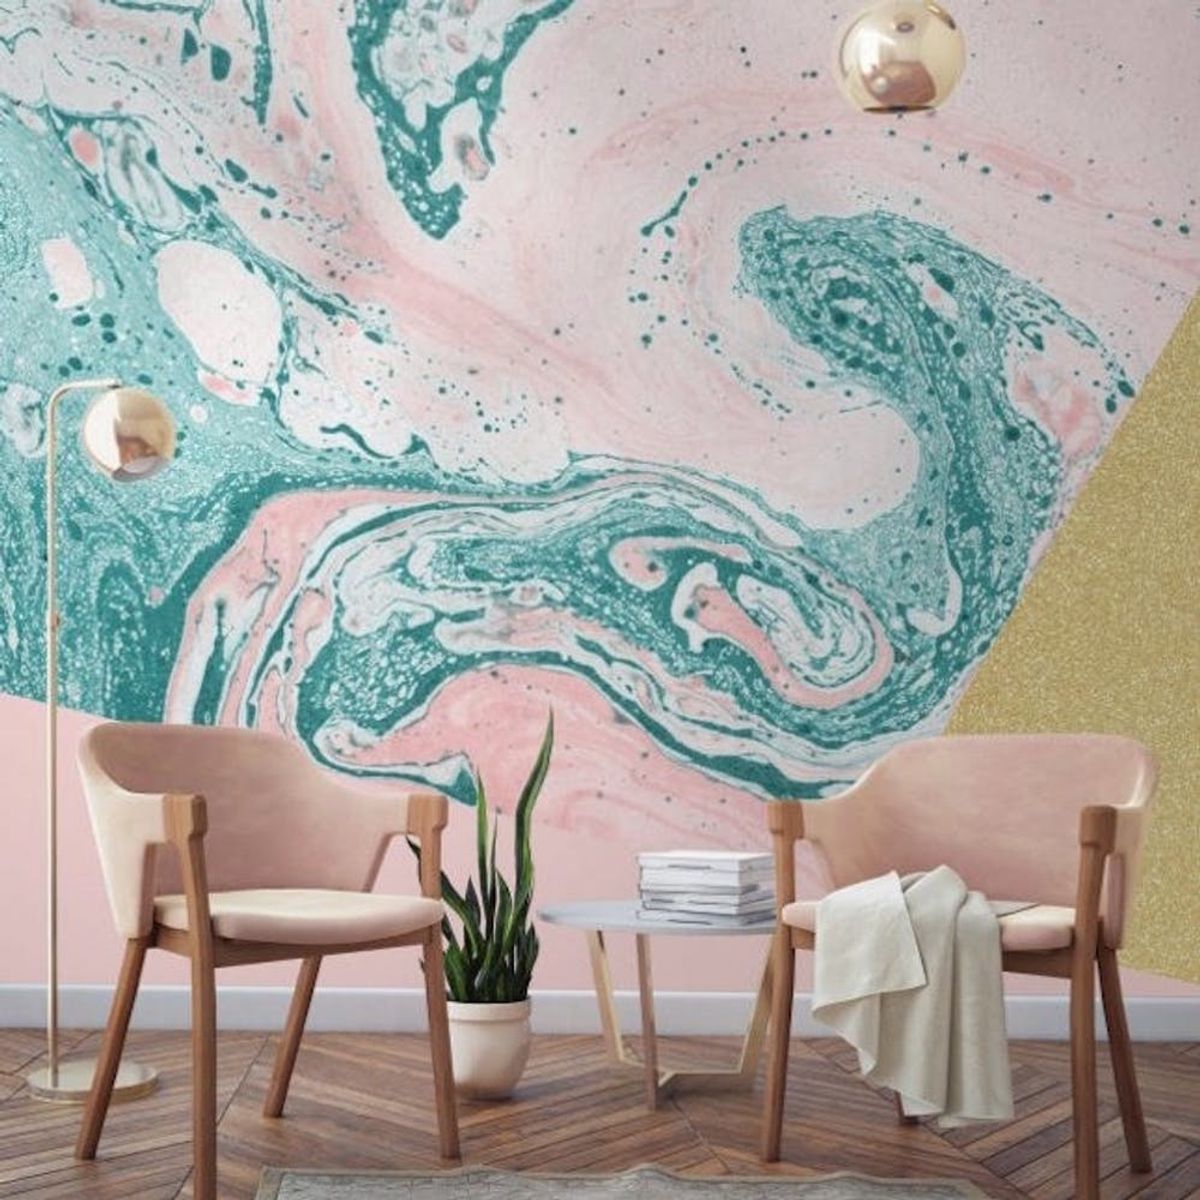 Marble Wallpaper Is the Latest Trend You’ll Want Your Home to Rock